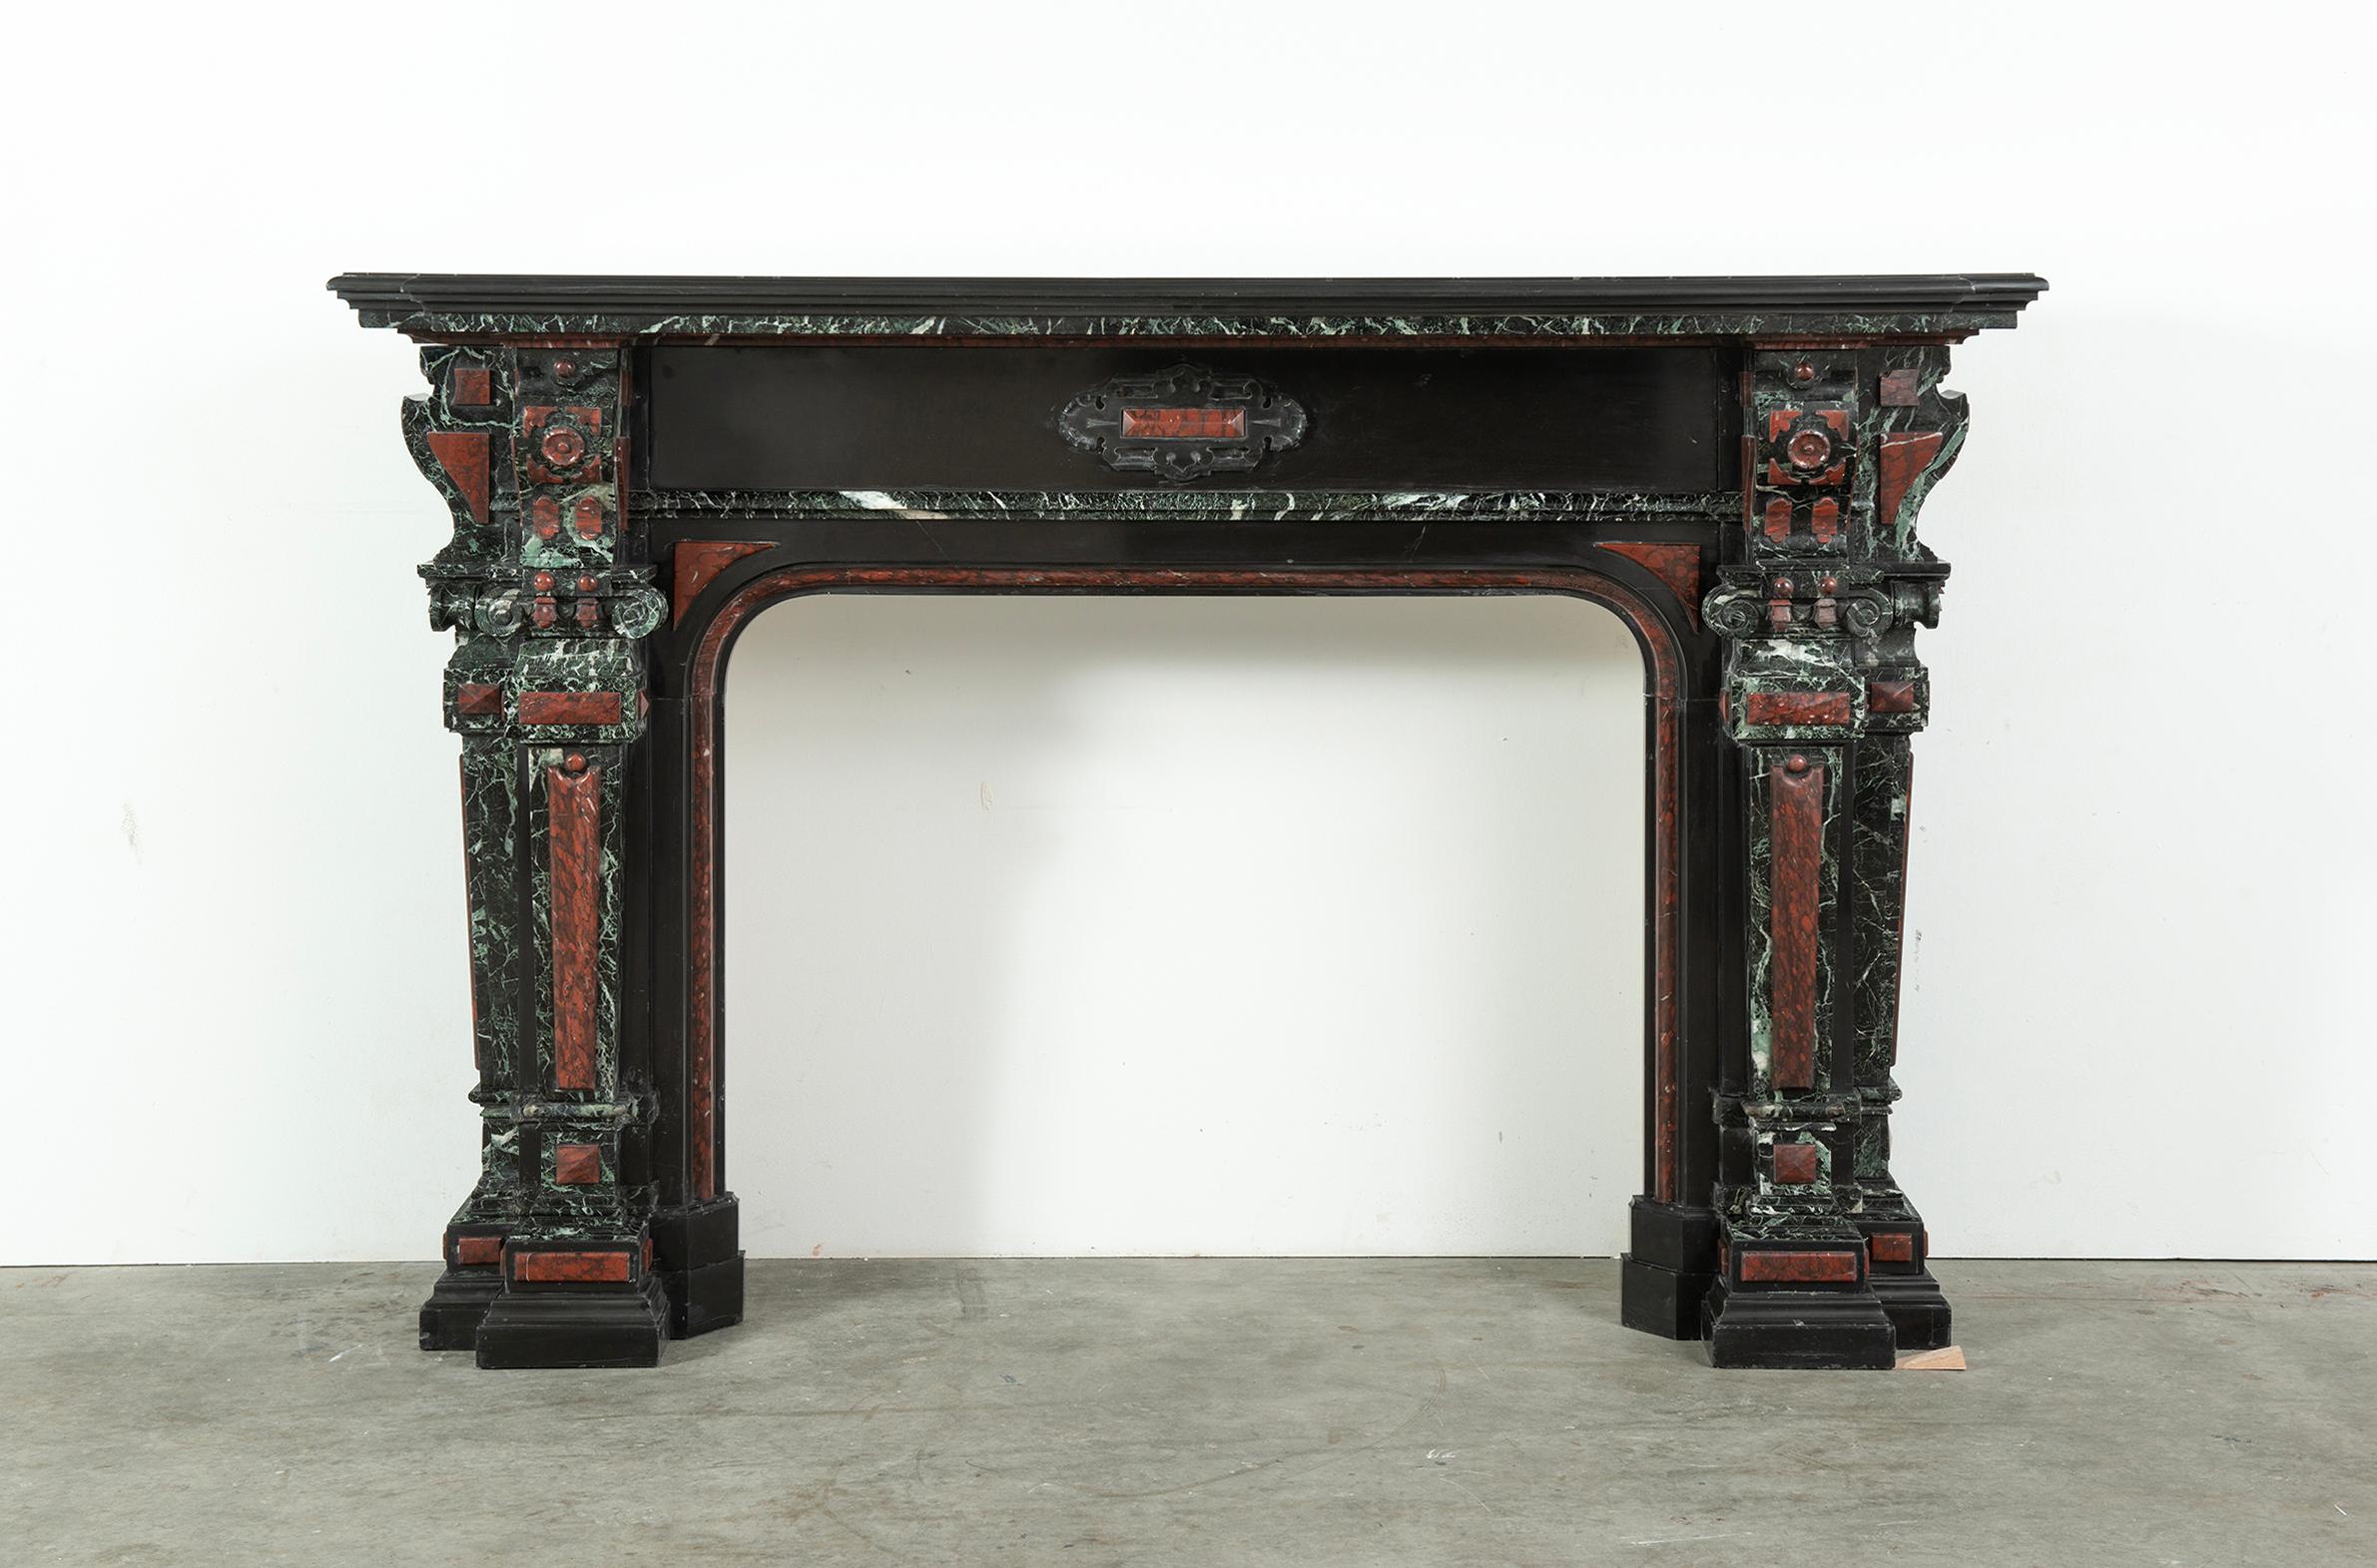 A very ornate, colorful and impressive Dutch fireplace mantel.

This multi colored marble mantel is made from a very nice quality deep black marble from Belgium and decorations in red 